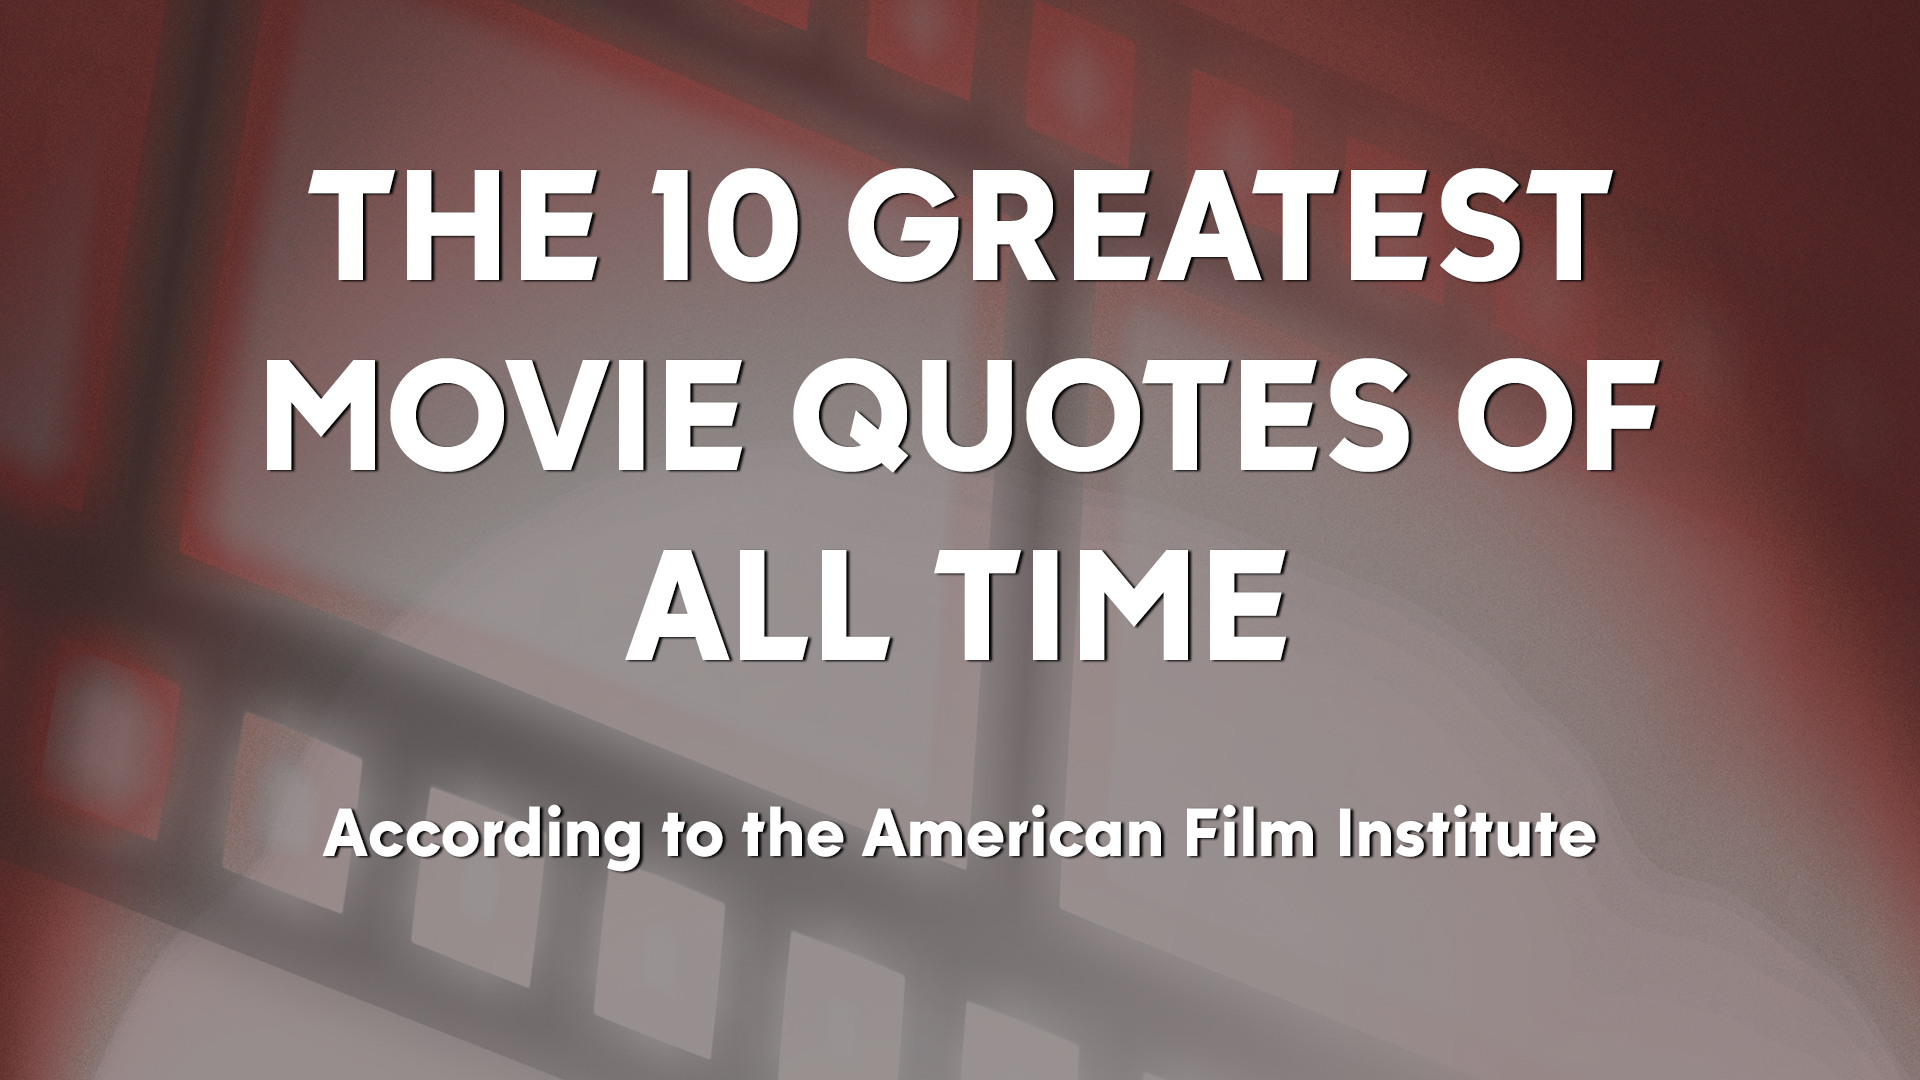 The 10 greatest movie quotes of all time | kgw.com